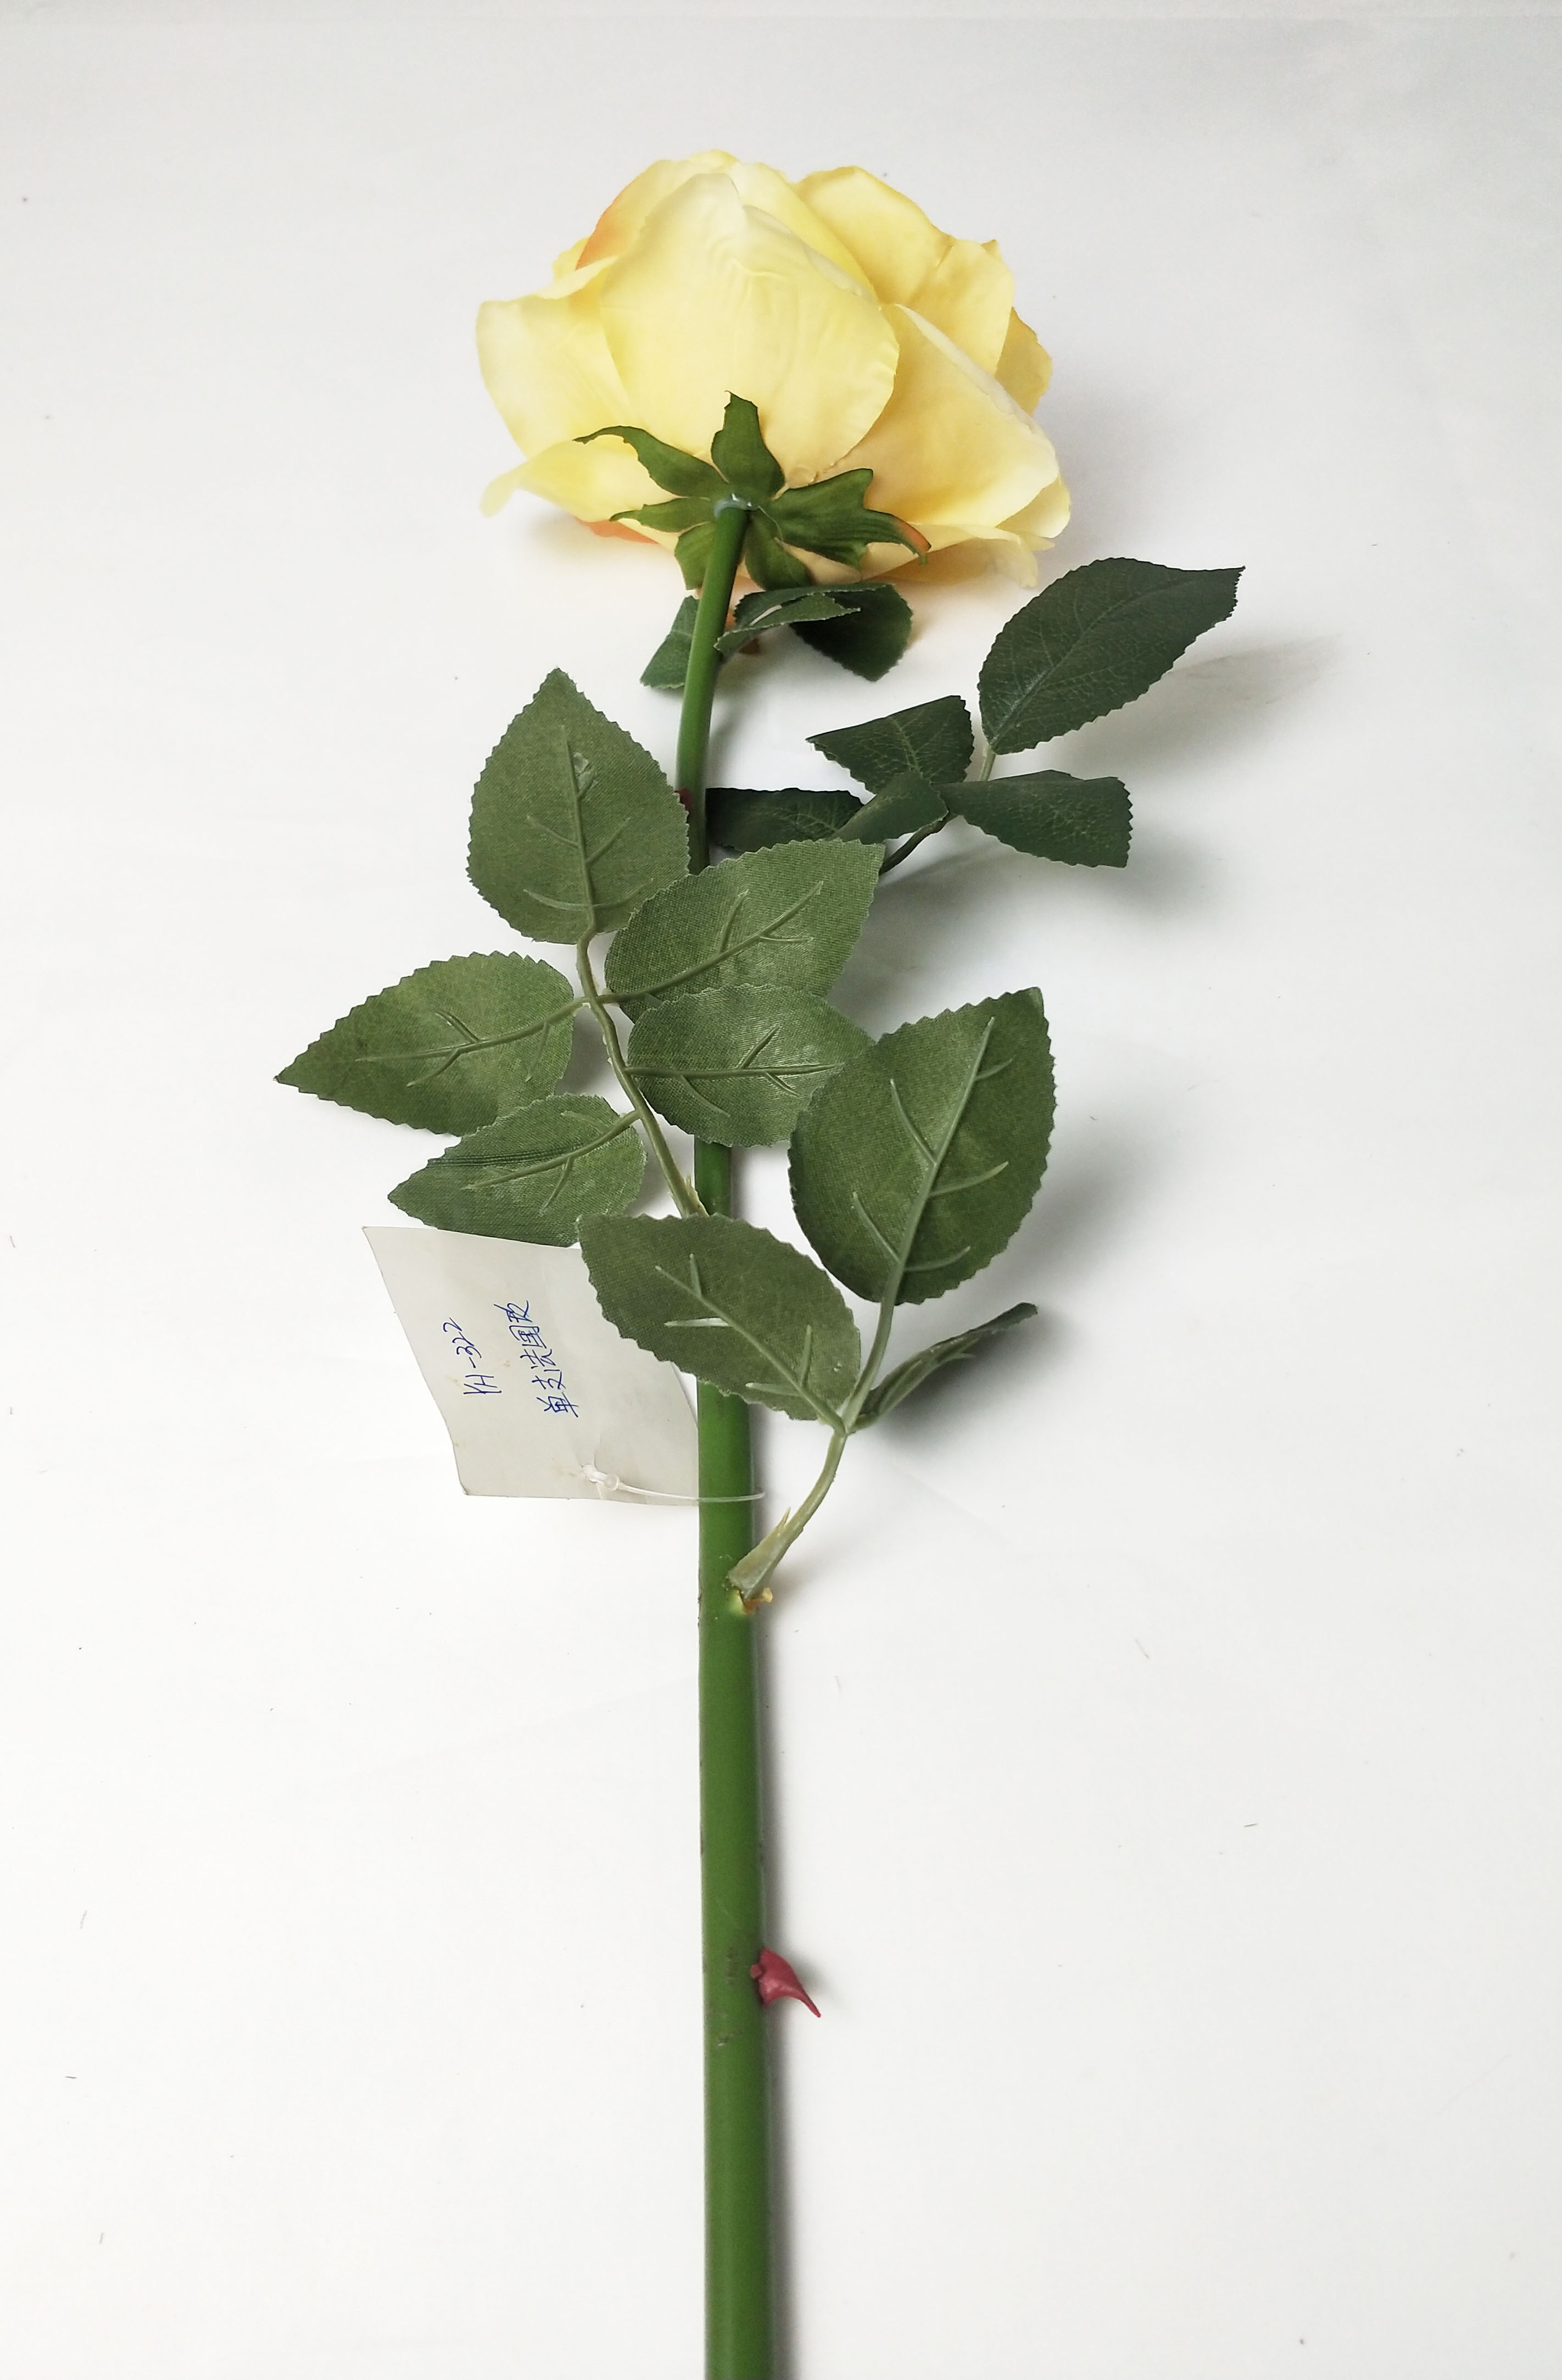 A Single Giant New Rose